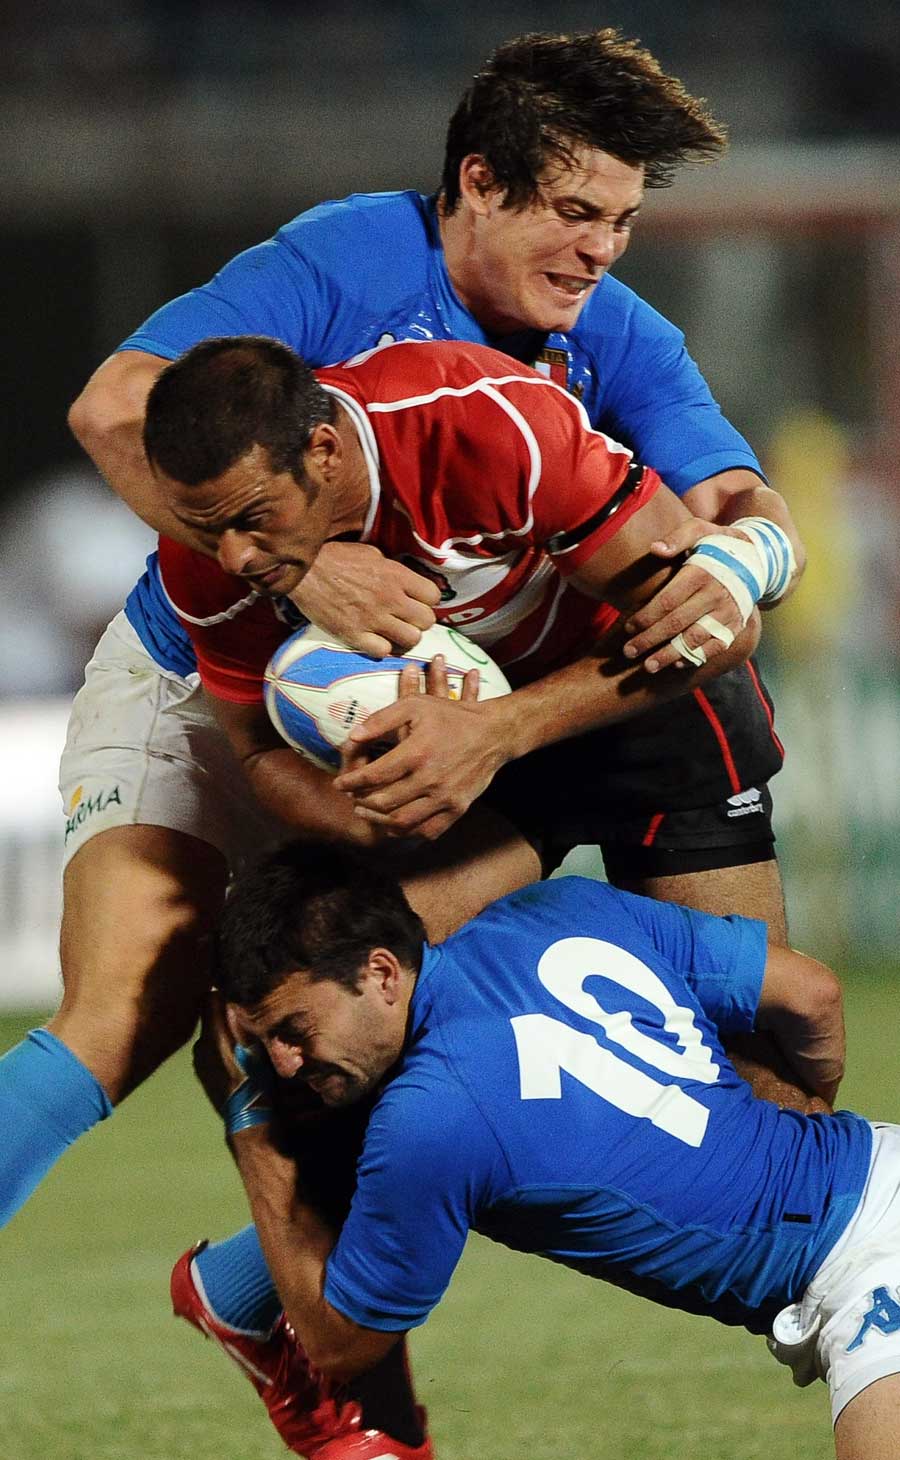 Japan's Ryan Nicholas is shackled by the Italy defence